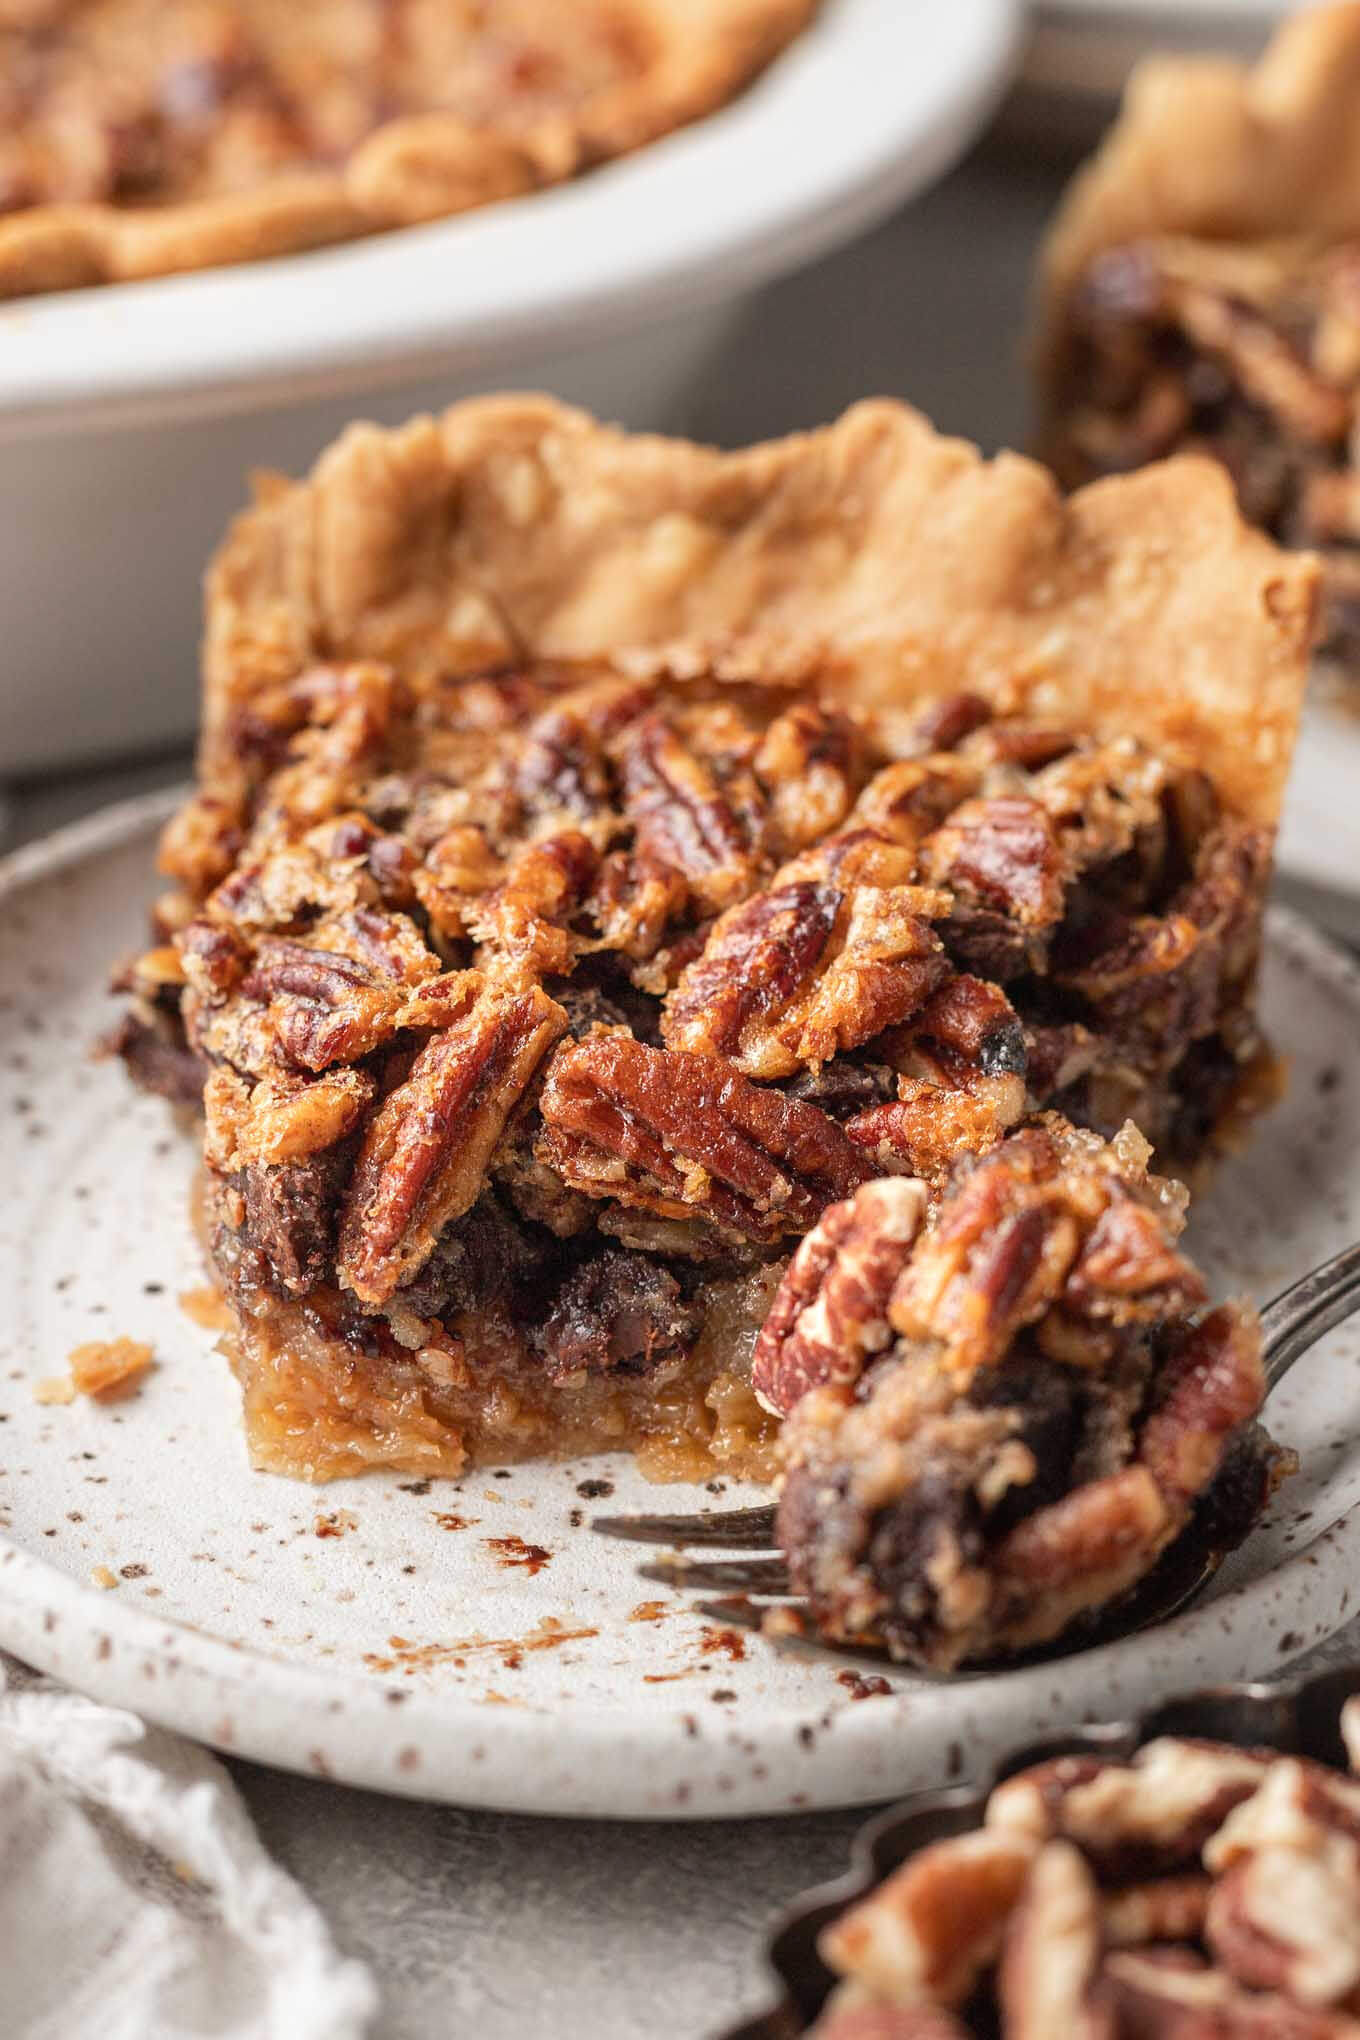 A front view of a slice of pecan chocolate pie on a speckled dessert plate. A forkful of pie rests in the foreground.  